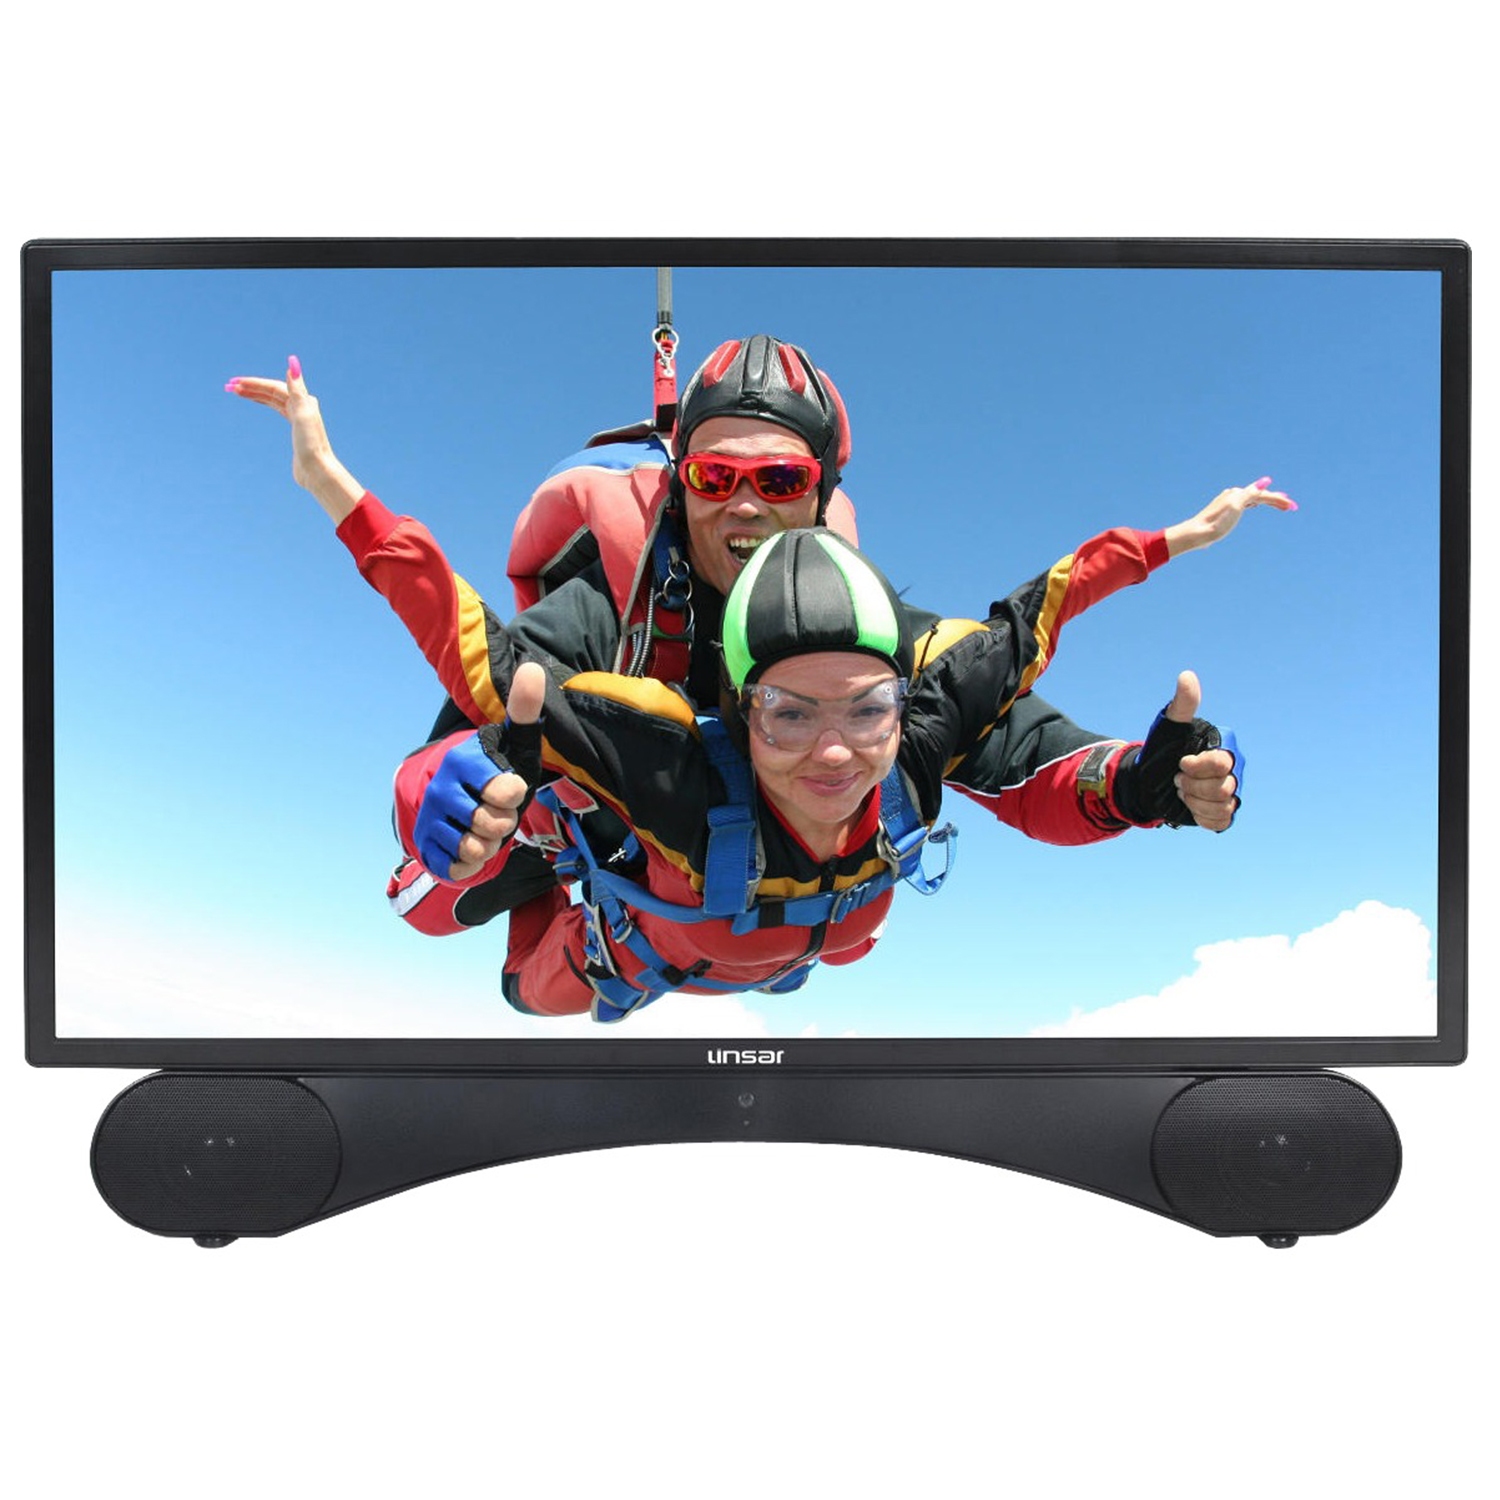 Linsar X24DVDMK3 24" Full HD TV - built-in DVD player and Freeview HD - 0